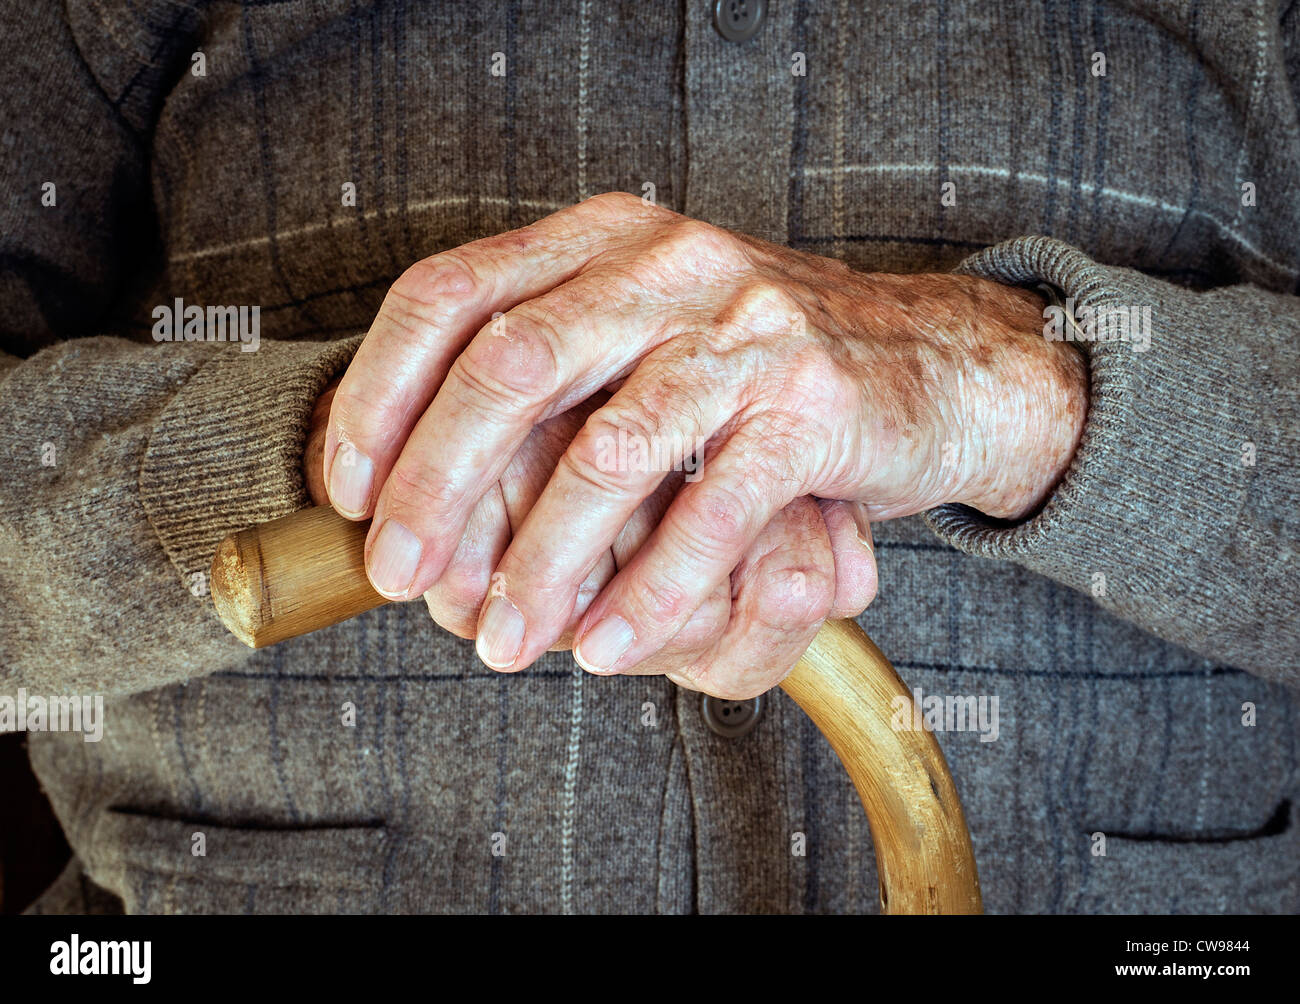 Mature Arthritic Hands of an elderly man, with swollen knuckles, at rest on a walking stick. UK Stock Photo